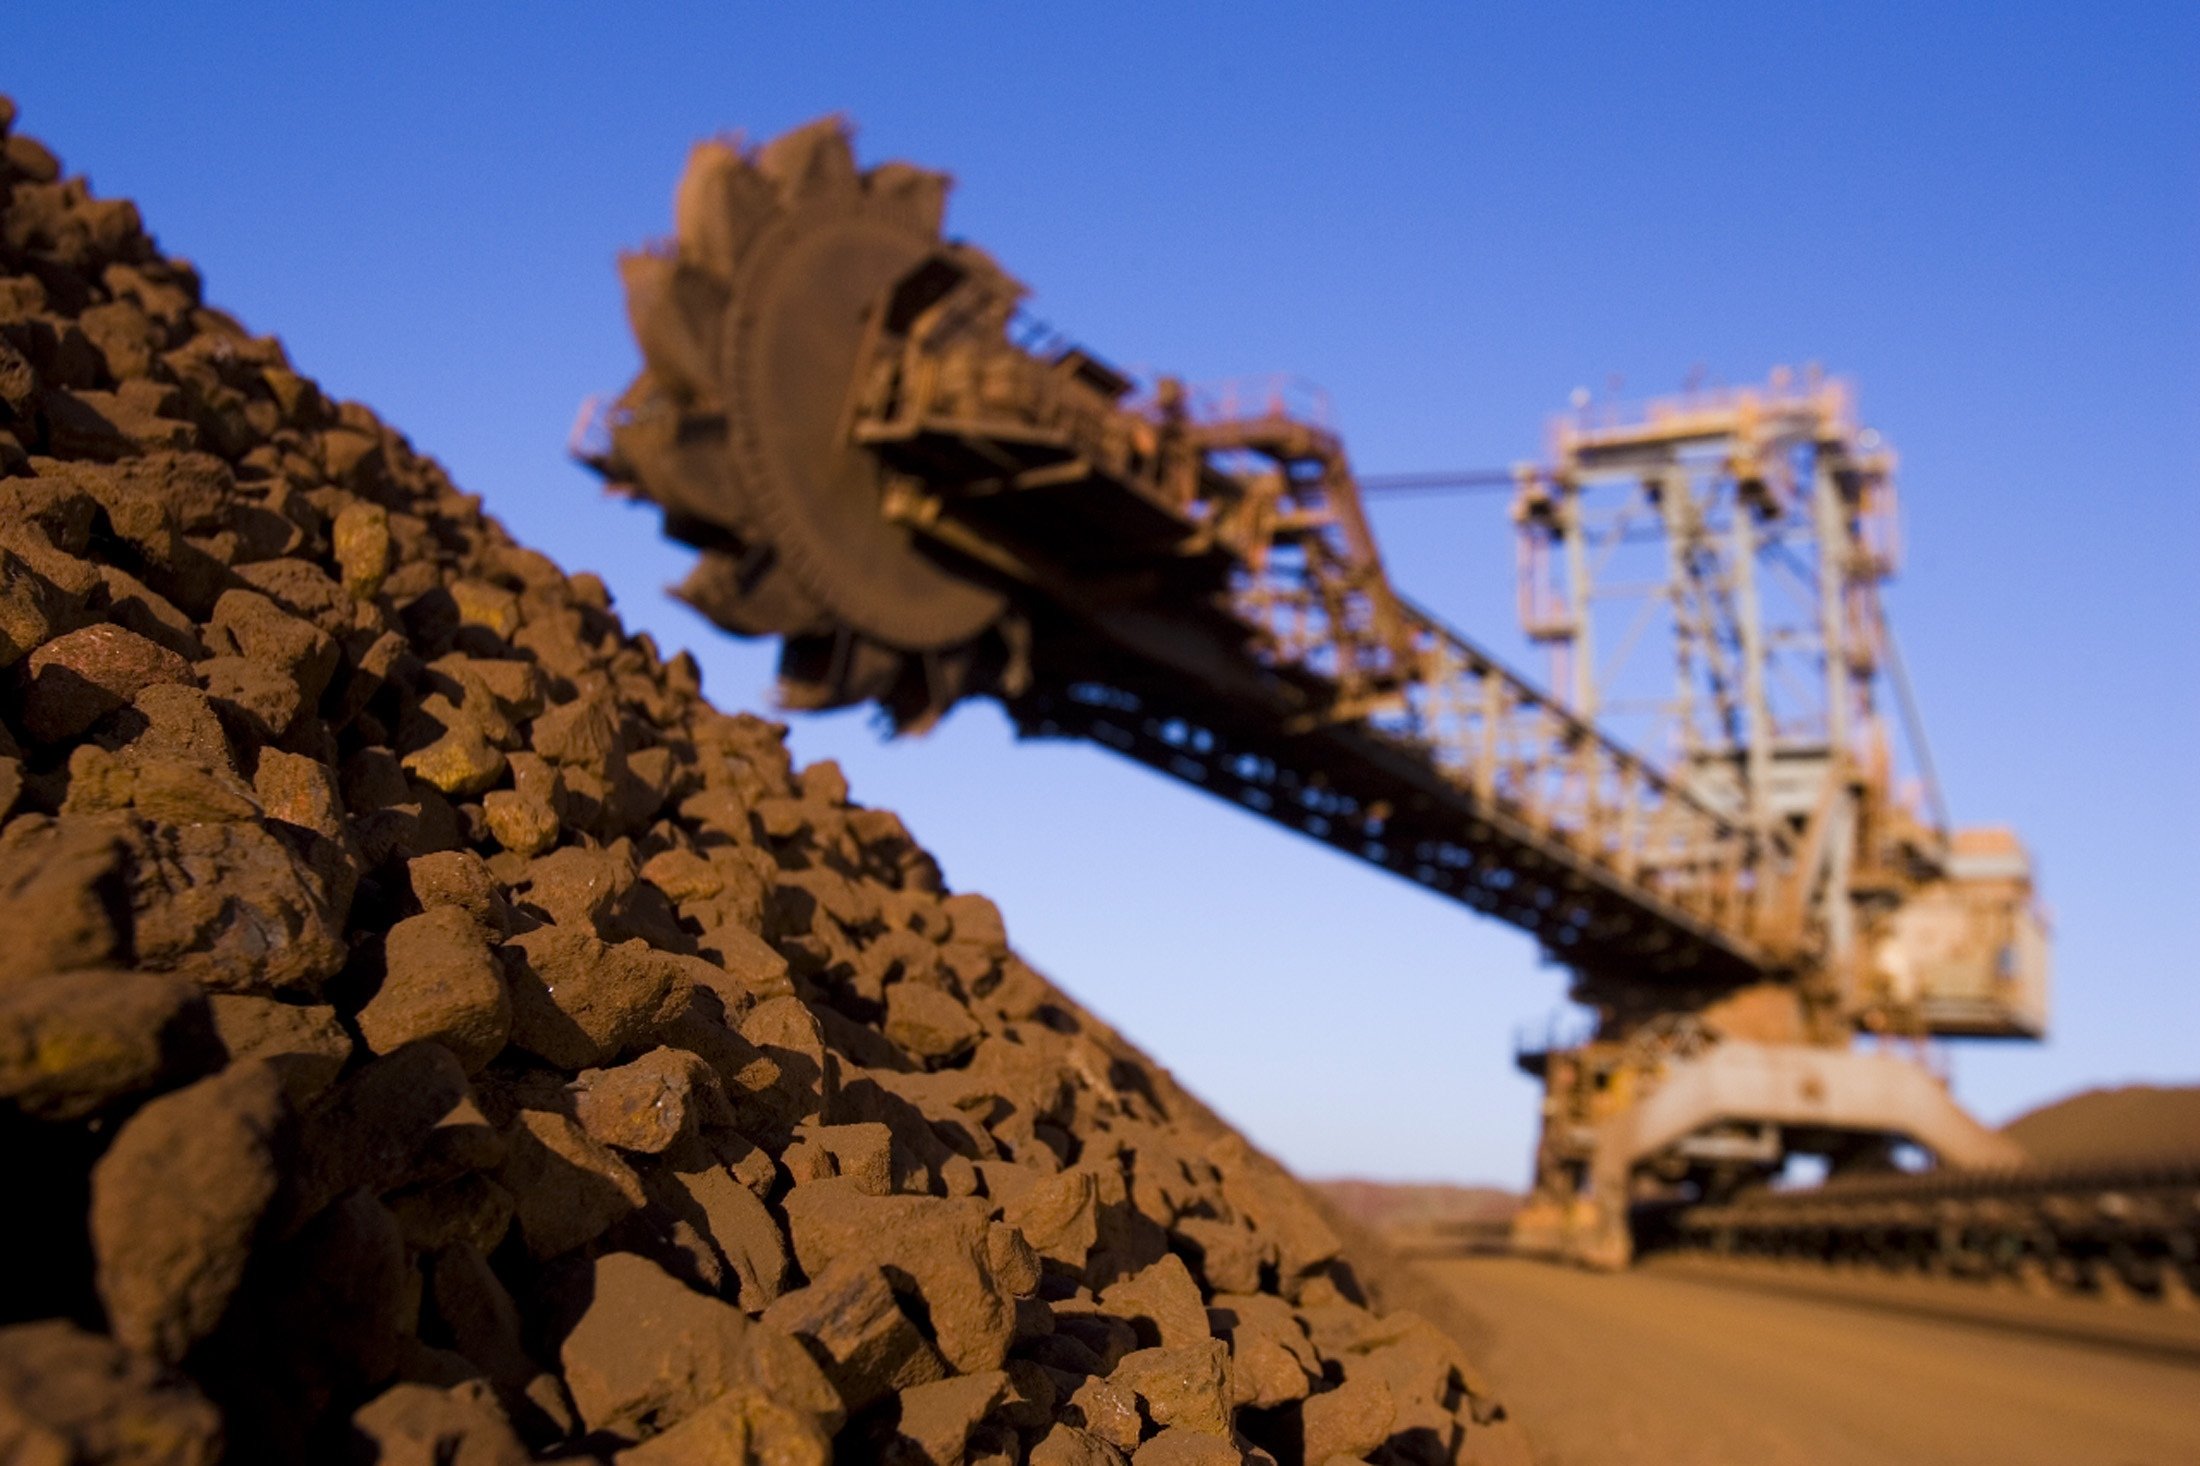 BHP said it could boost its annual iron ore output rate from 225 million tonnes at the end of 2013 to 290 million by June 2017. Photo: Reuters